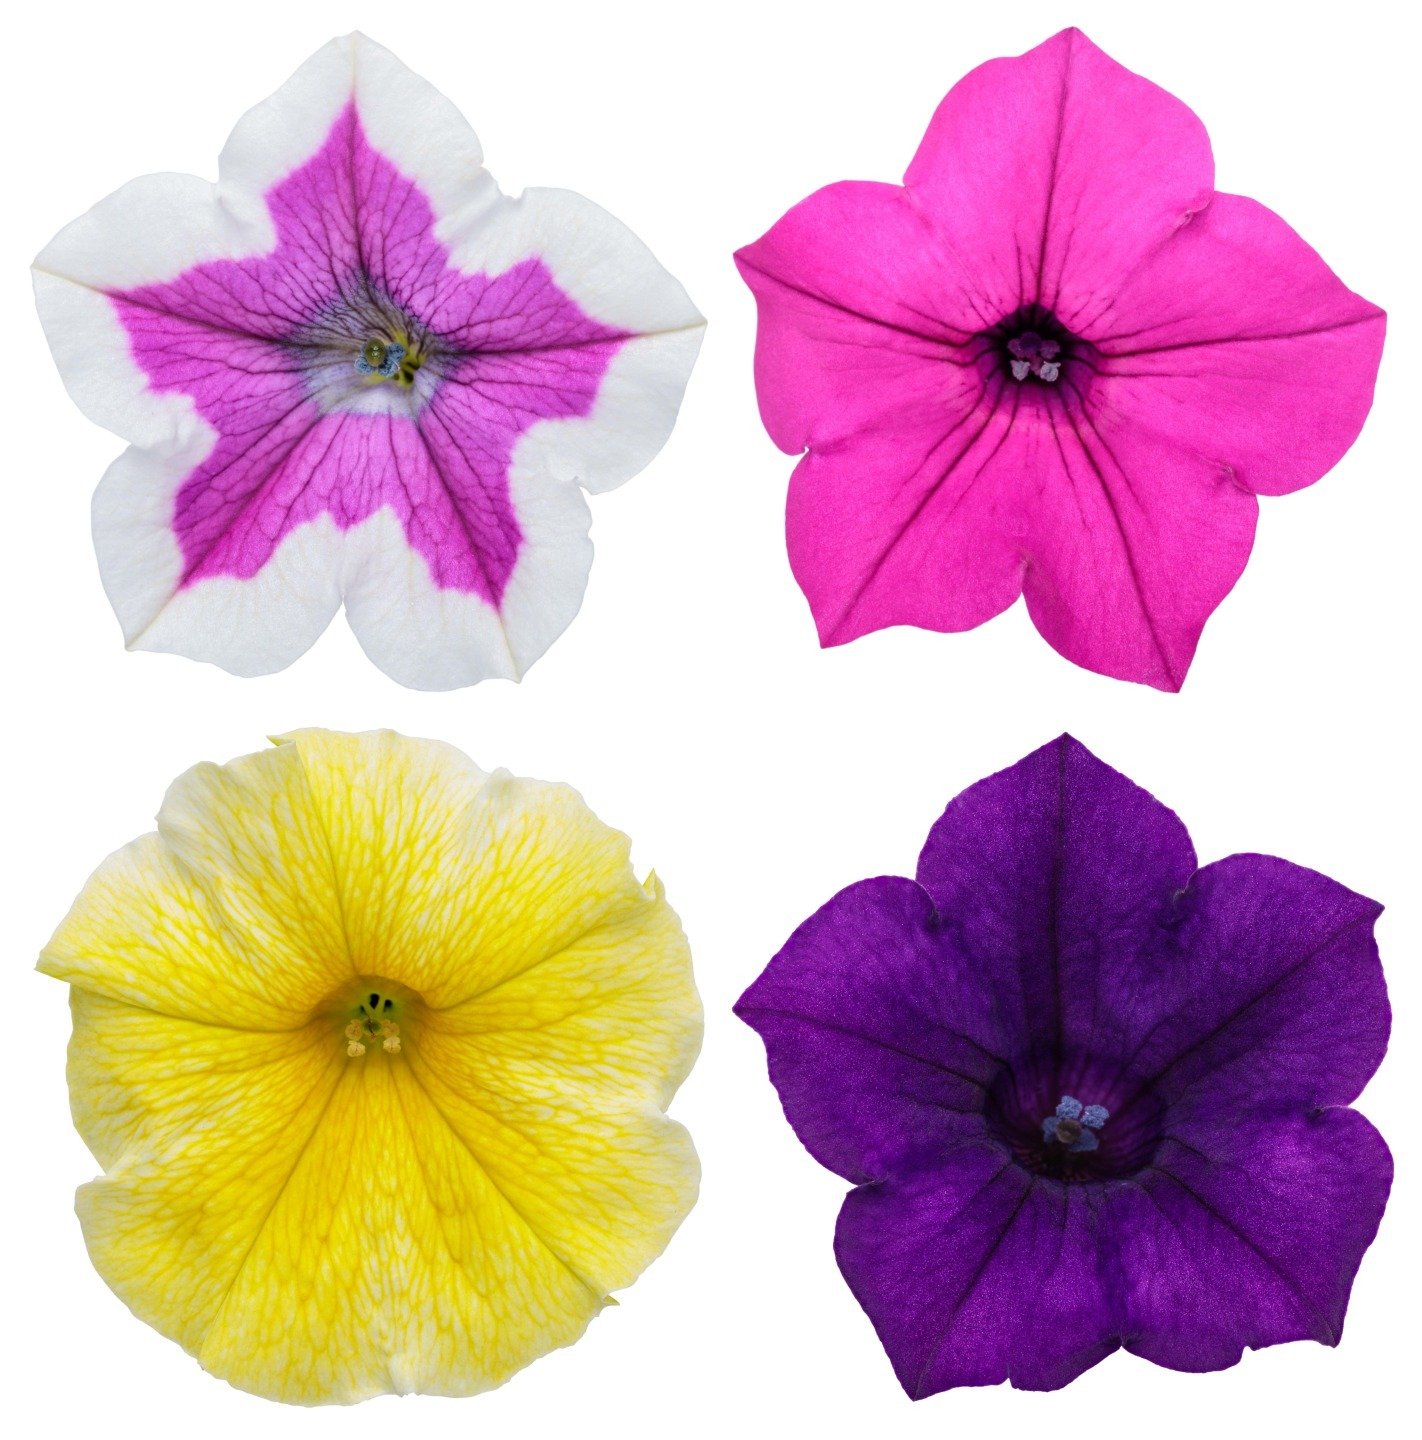 Looking for the latest and greatest in petunias? ProvenWinners has four new varieties this year that we are so excited for you to grow: 

Supertunia&reg; Hoopla&trade; Vivid Orchid&trade;: purple flowers with a bright white border.
Supertunia&reg; Sa